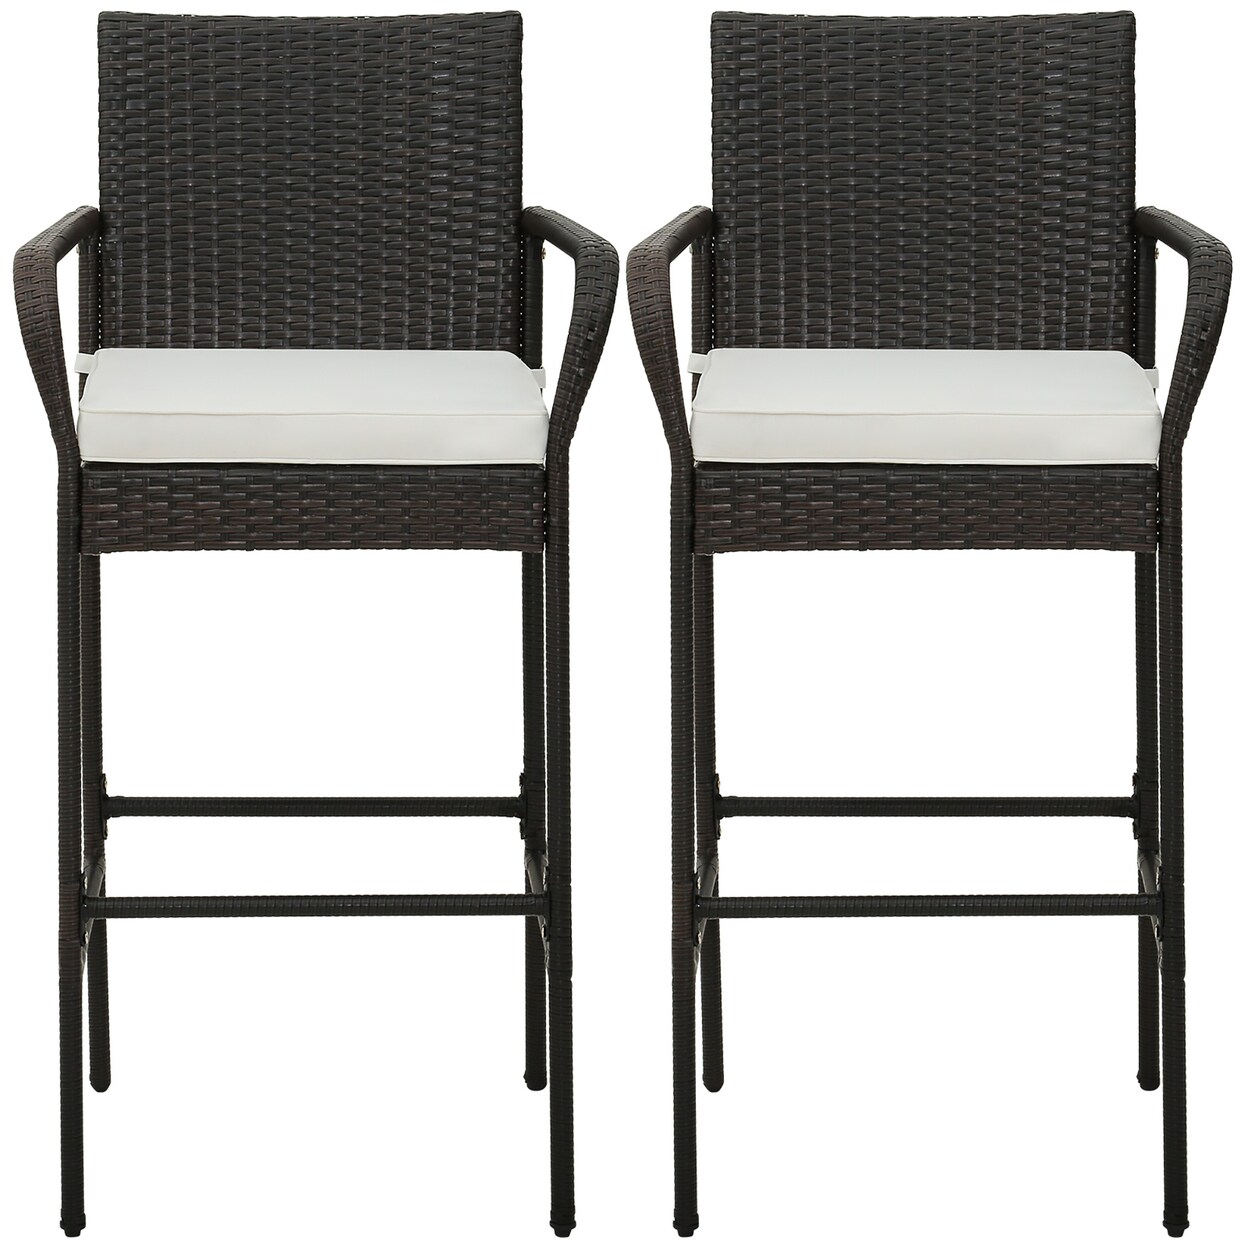 Gymax Set of 2 Wicker Bar Stools Set Outdoor High Back Bar Counter Chairs w/ Cushions